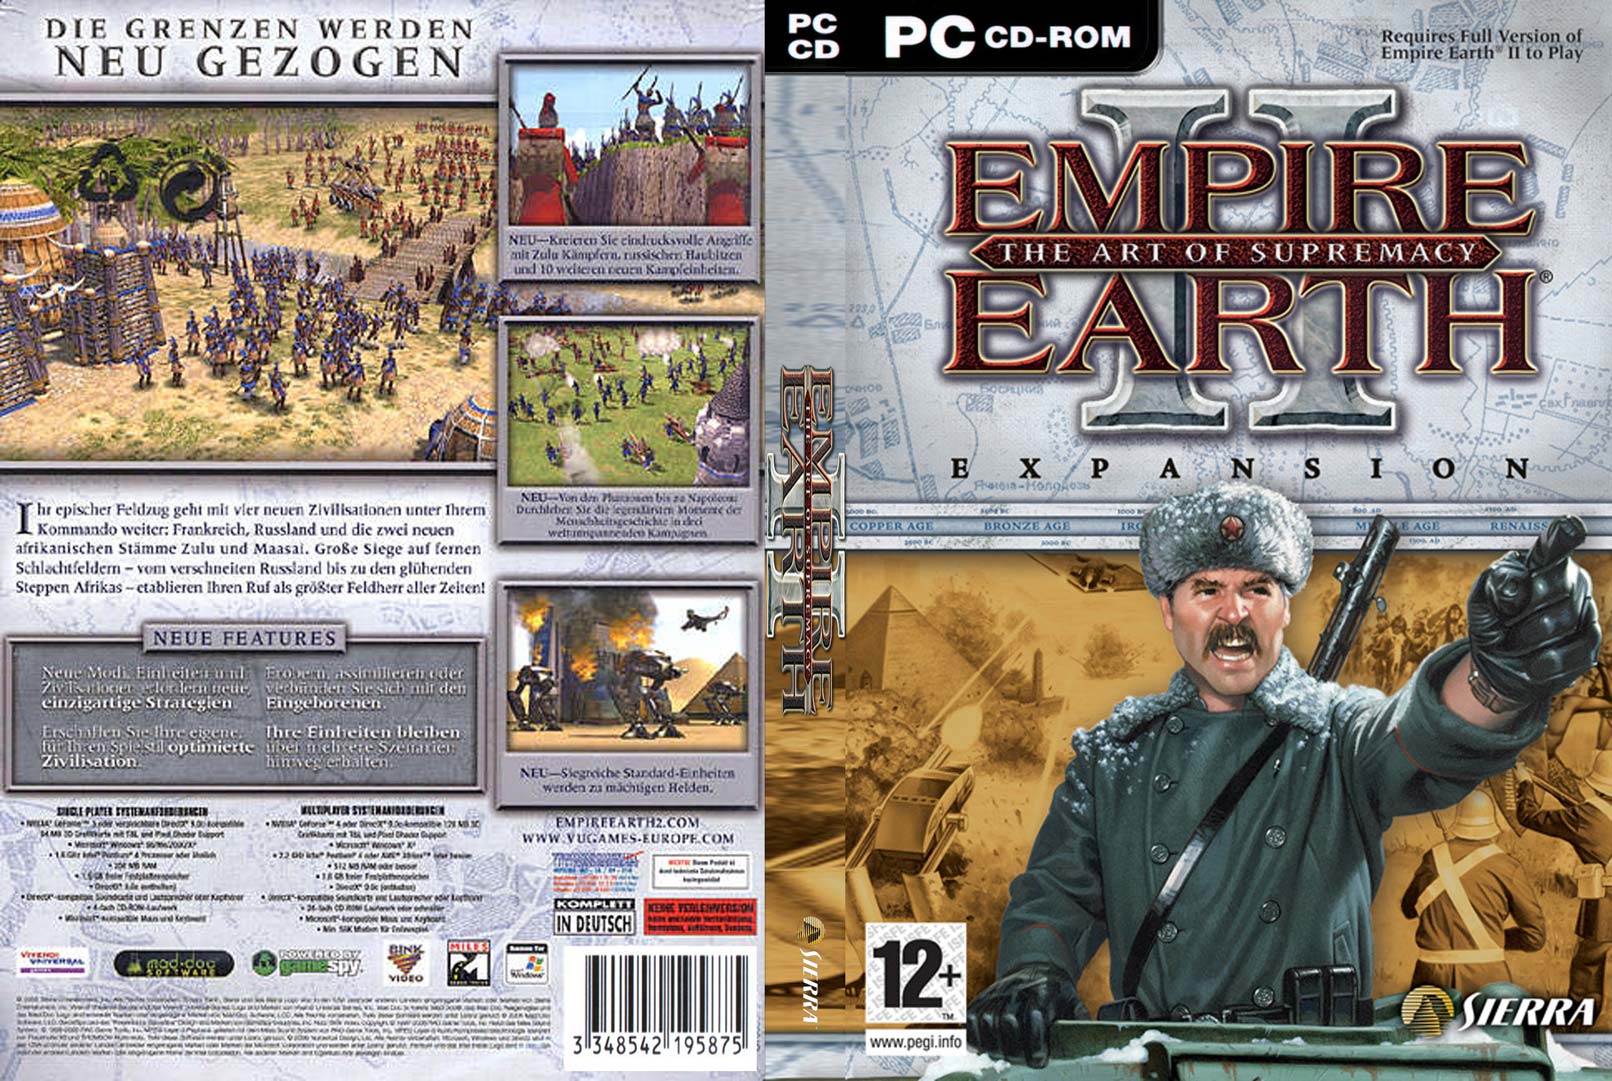 Empire Earth 2: The Art of Supremacy - DVD obal